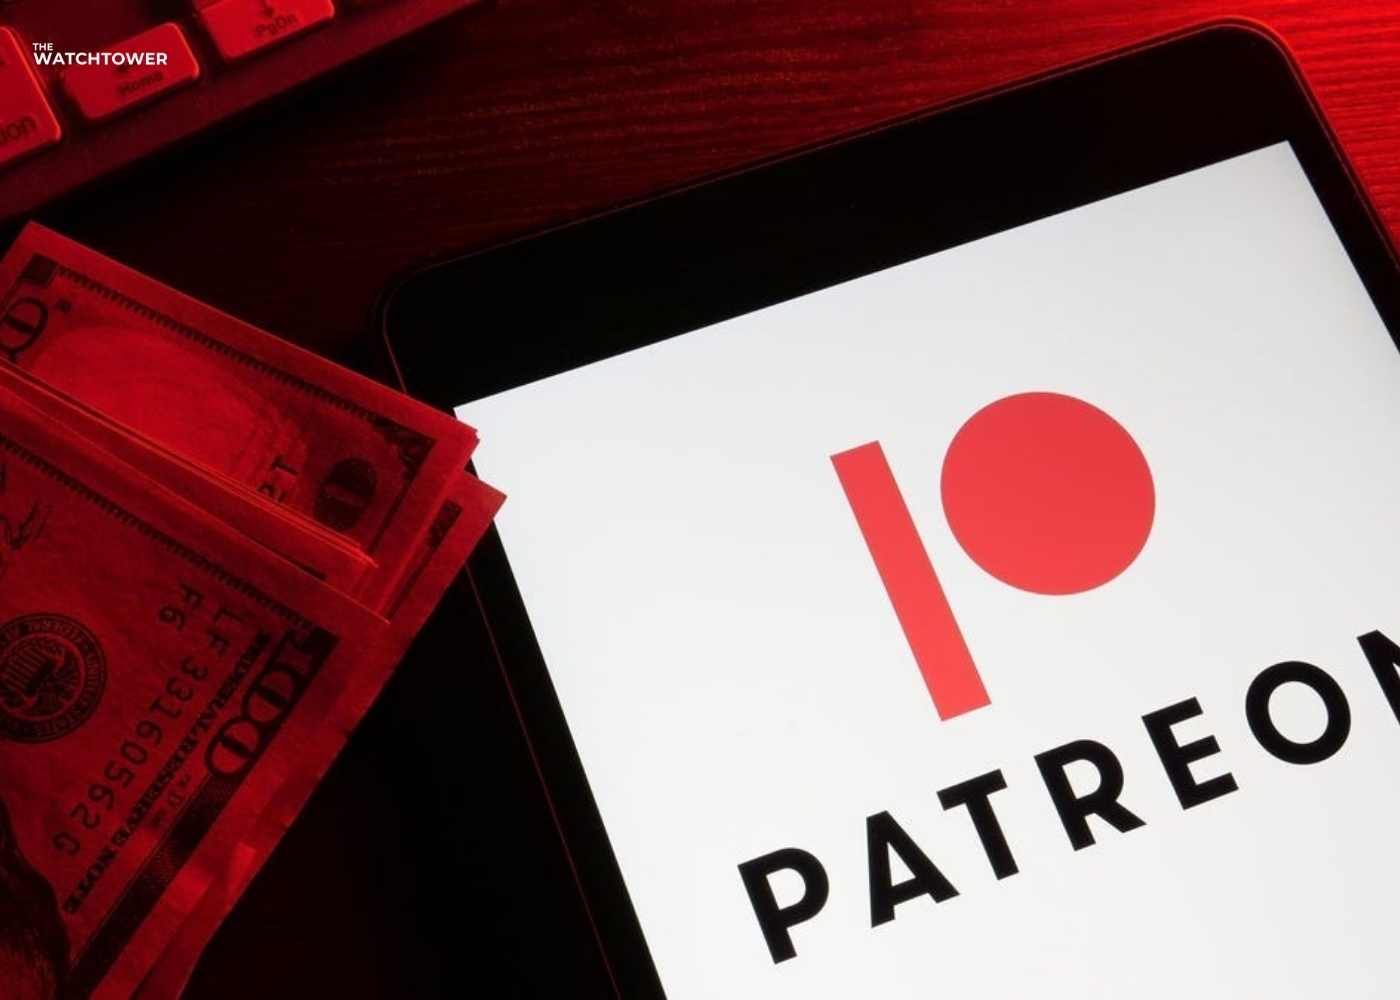 All You Need to Know About Patreon